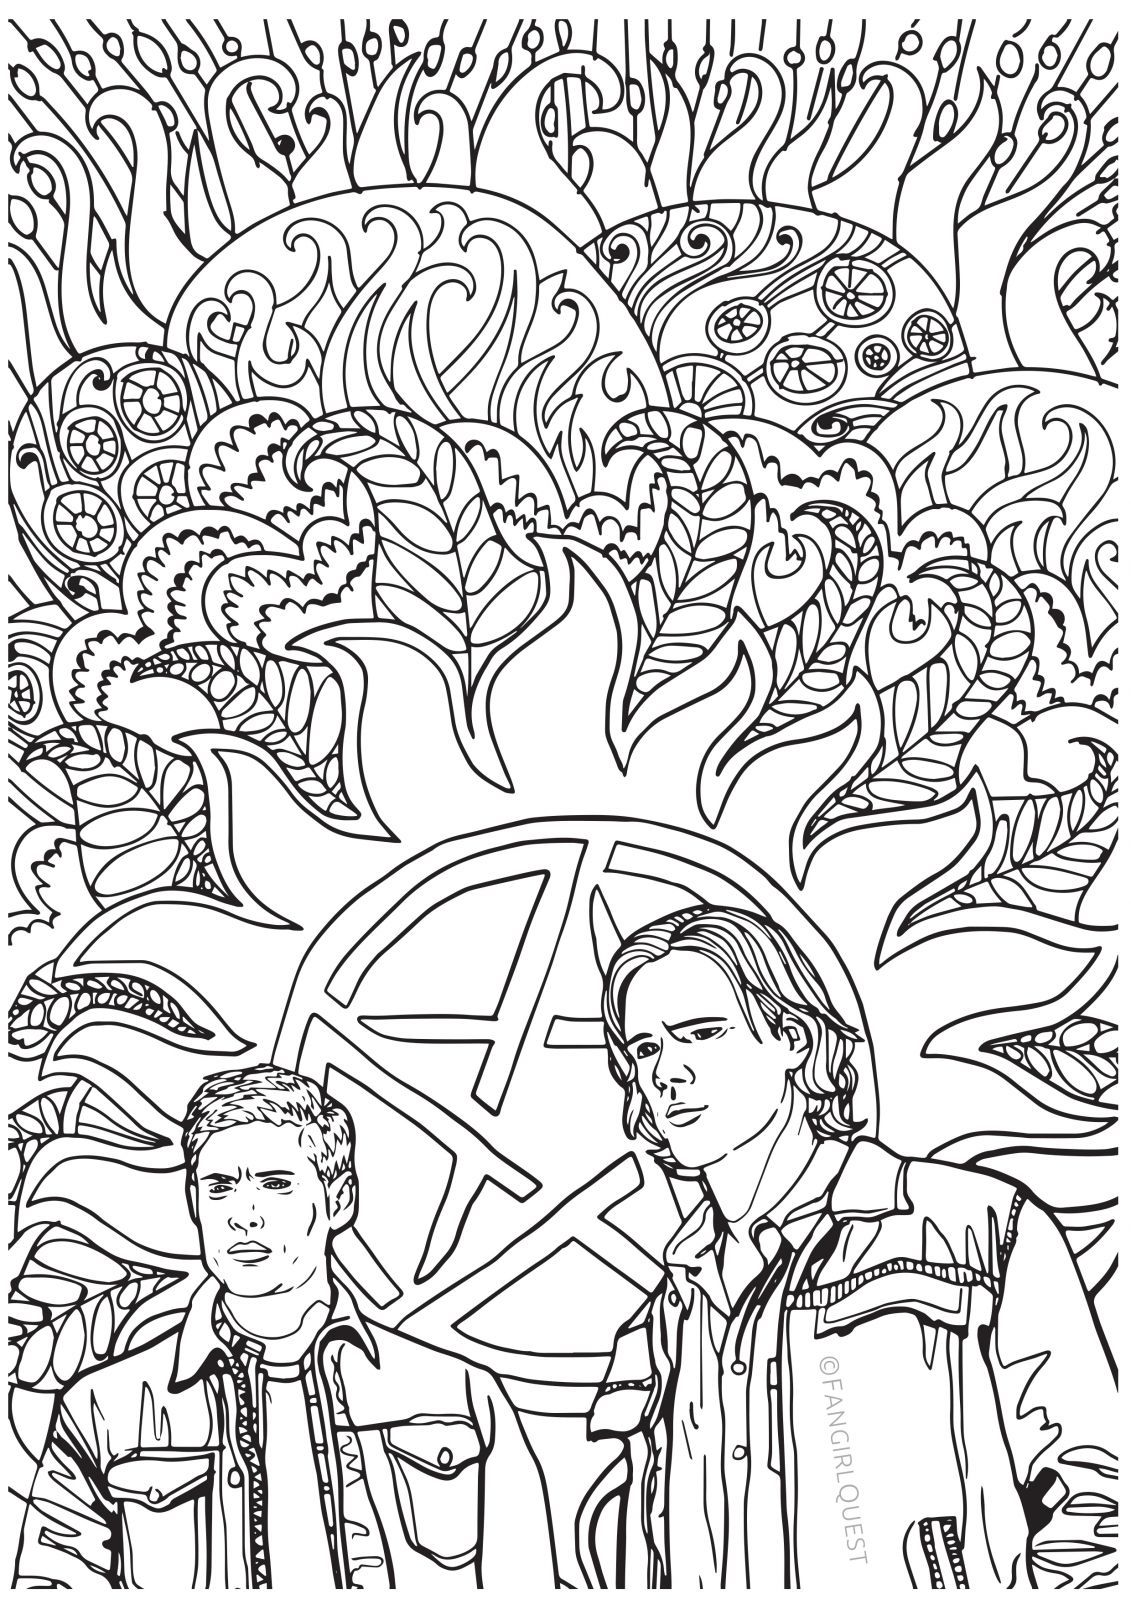 Coloring Pages For Adults Tumblr | Coloring books, Adult coloring ...